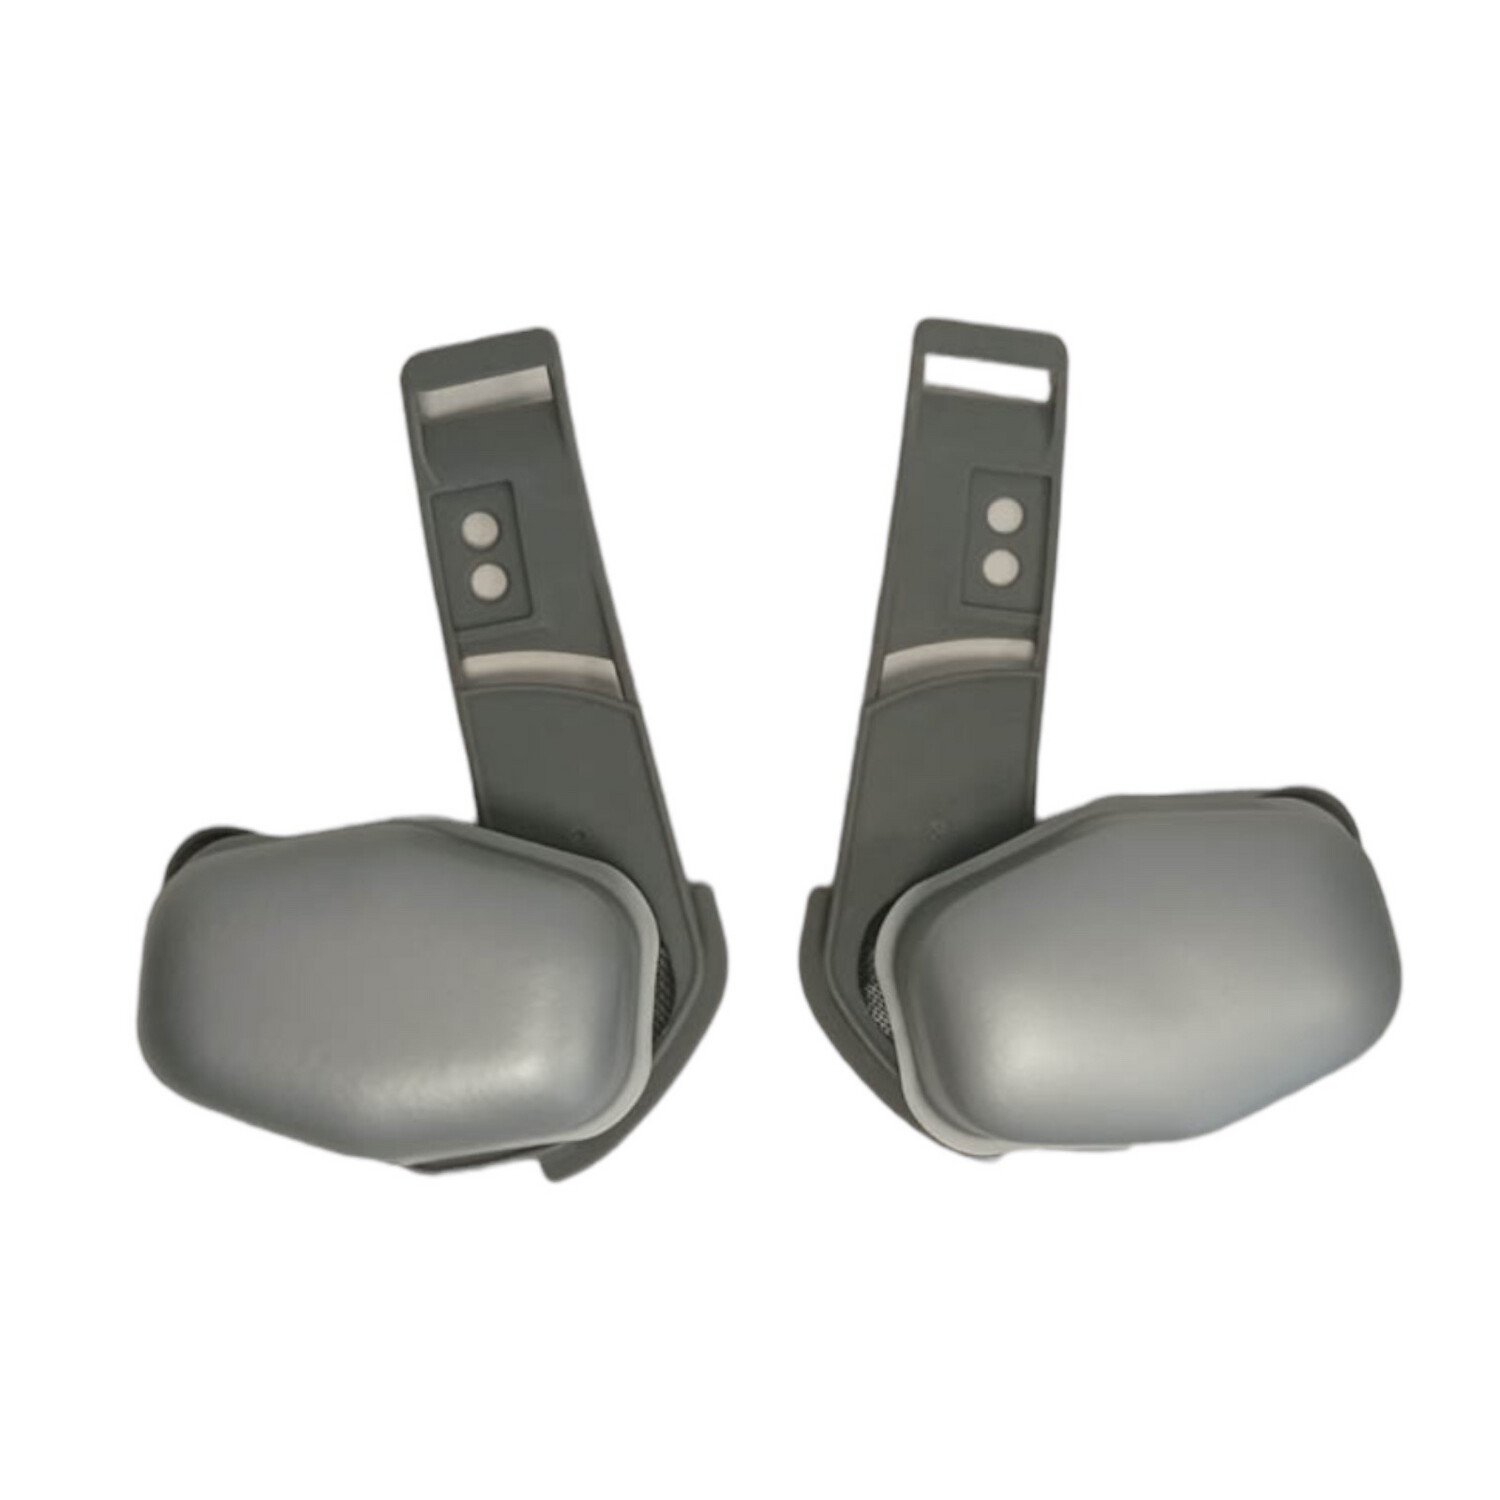 3DX JAW PADS XENITH 